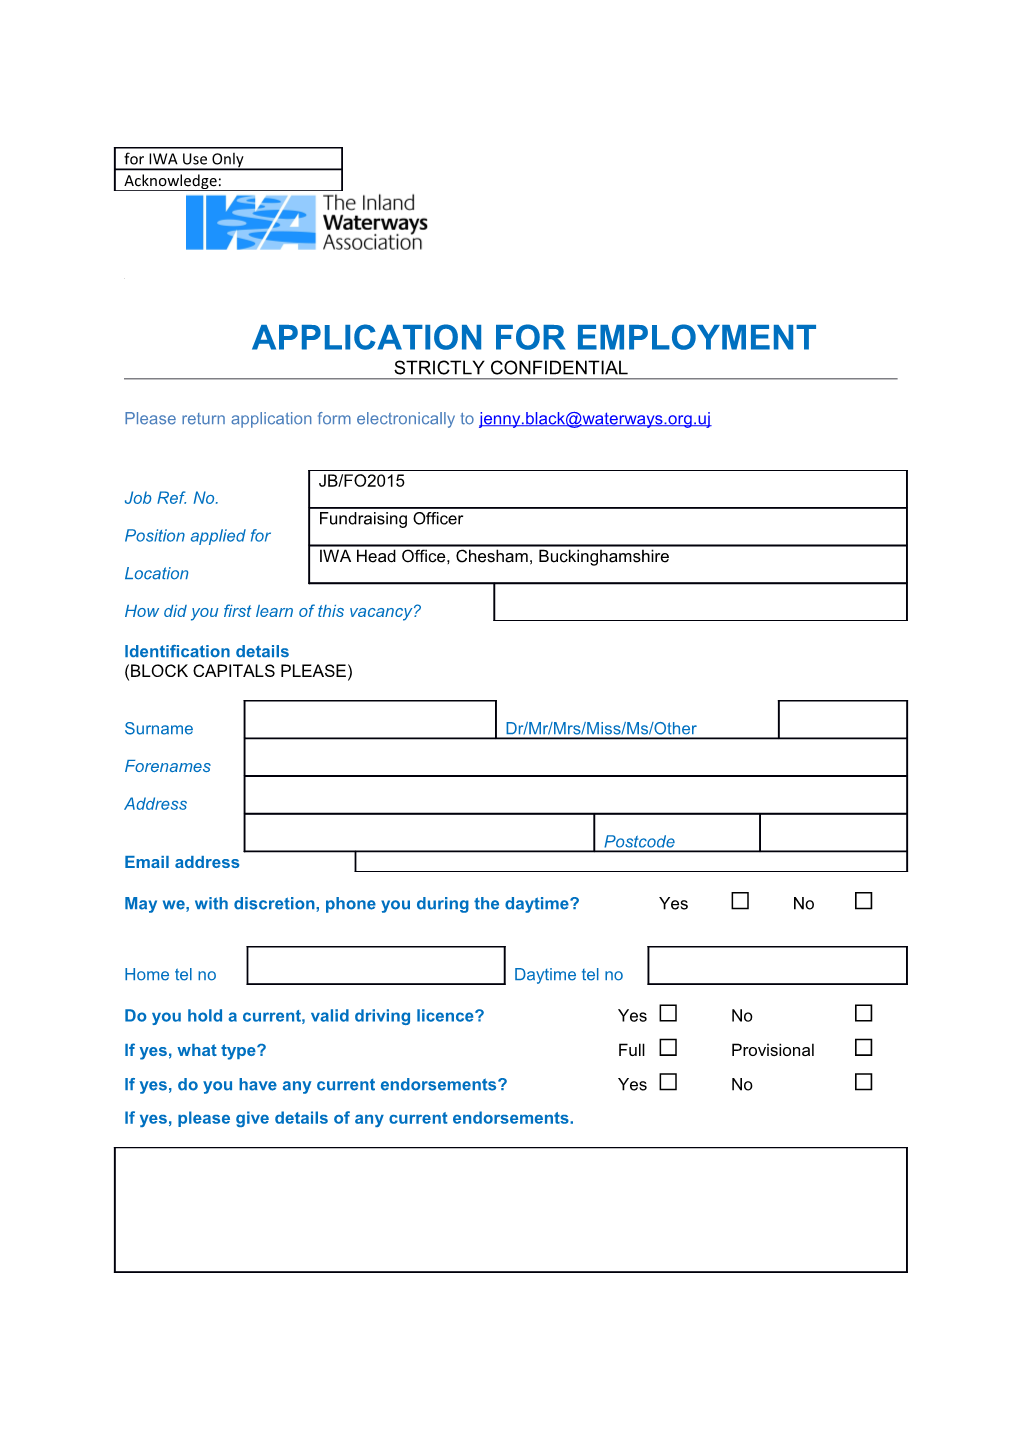 Please Return Application Form Electronically To